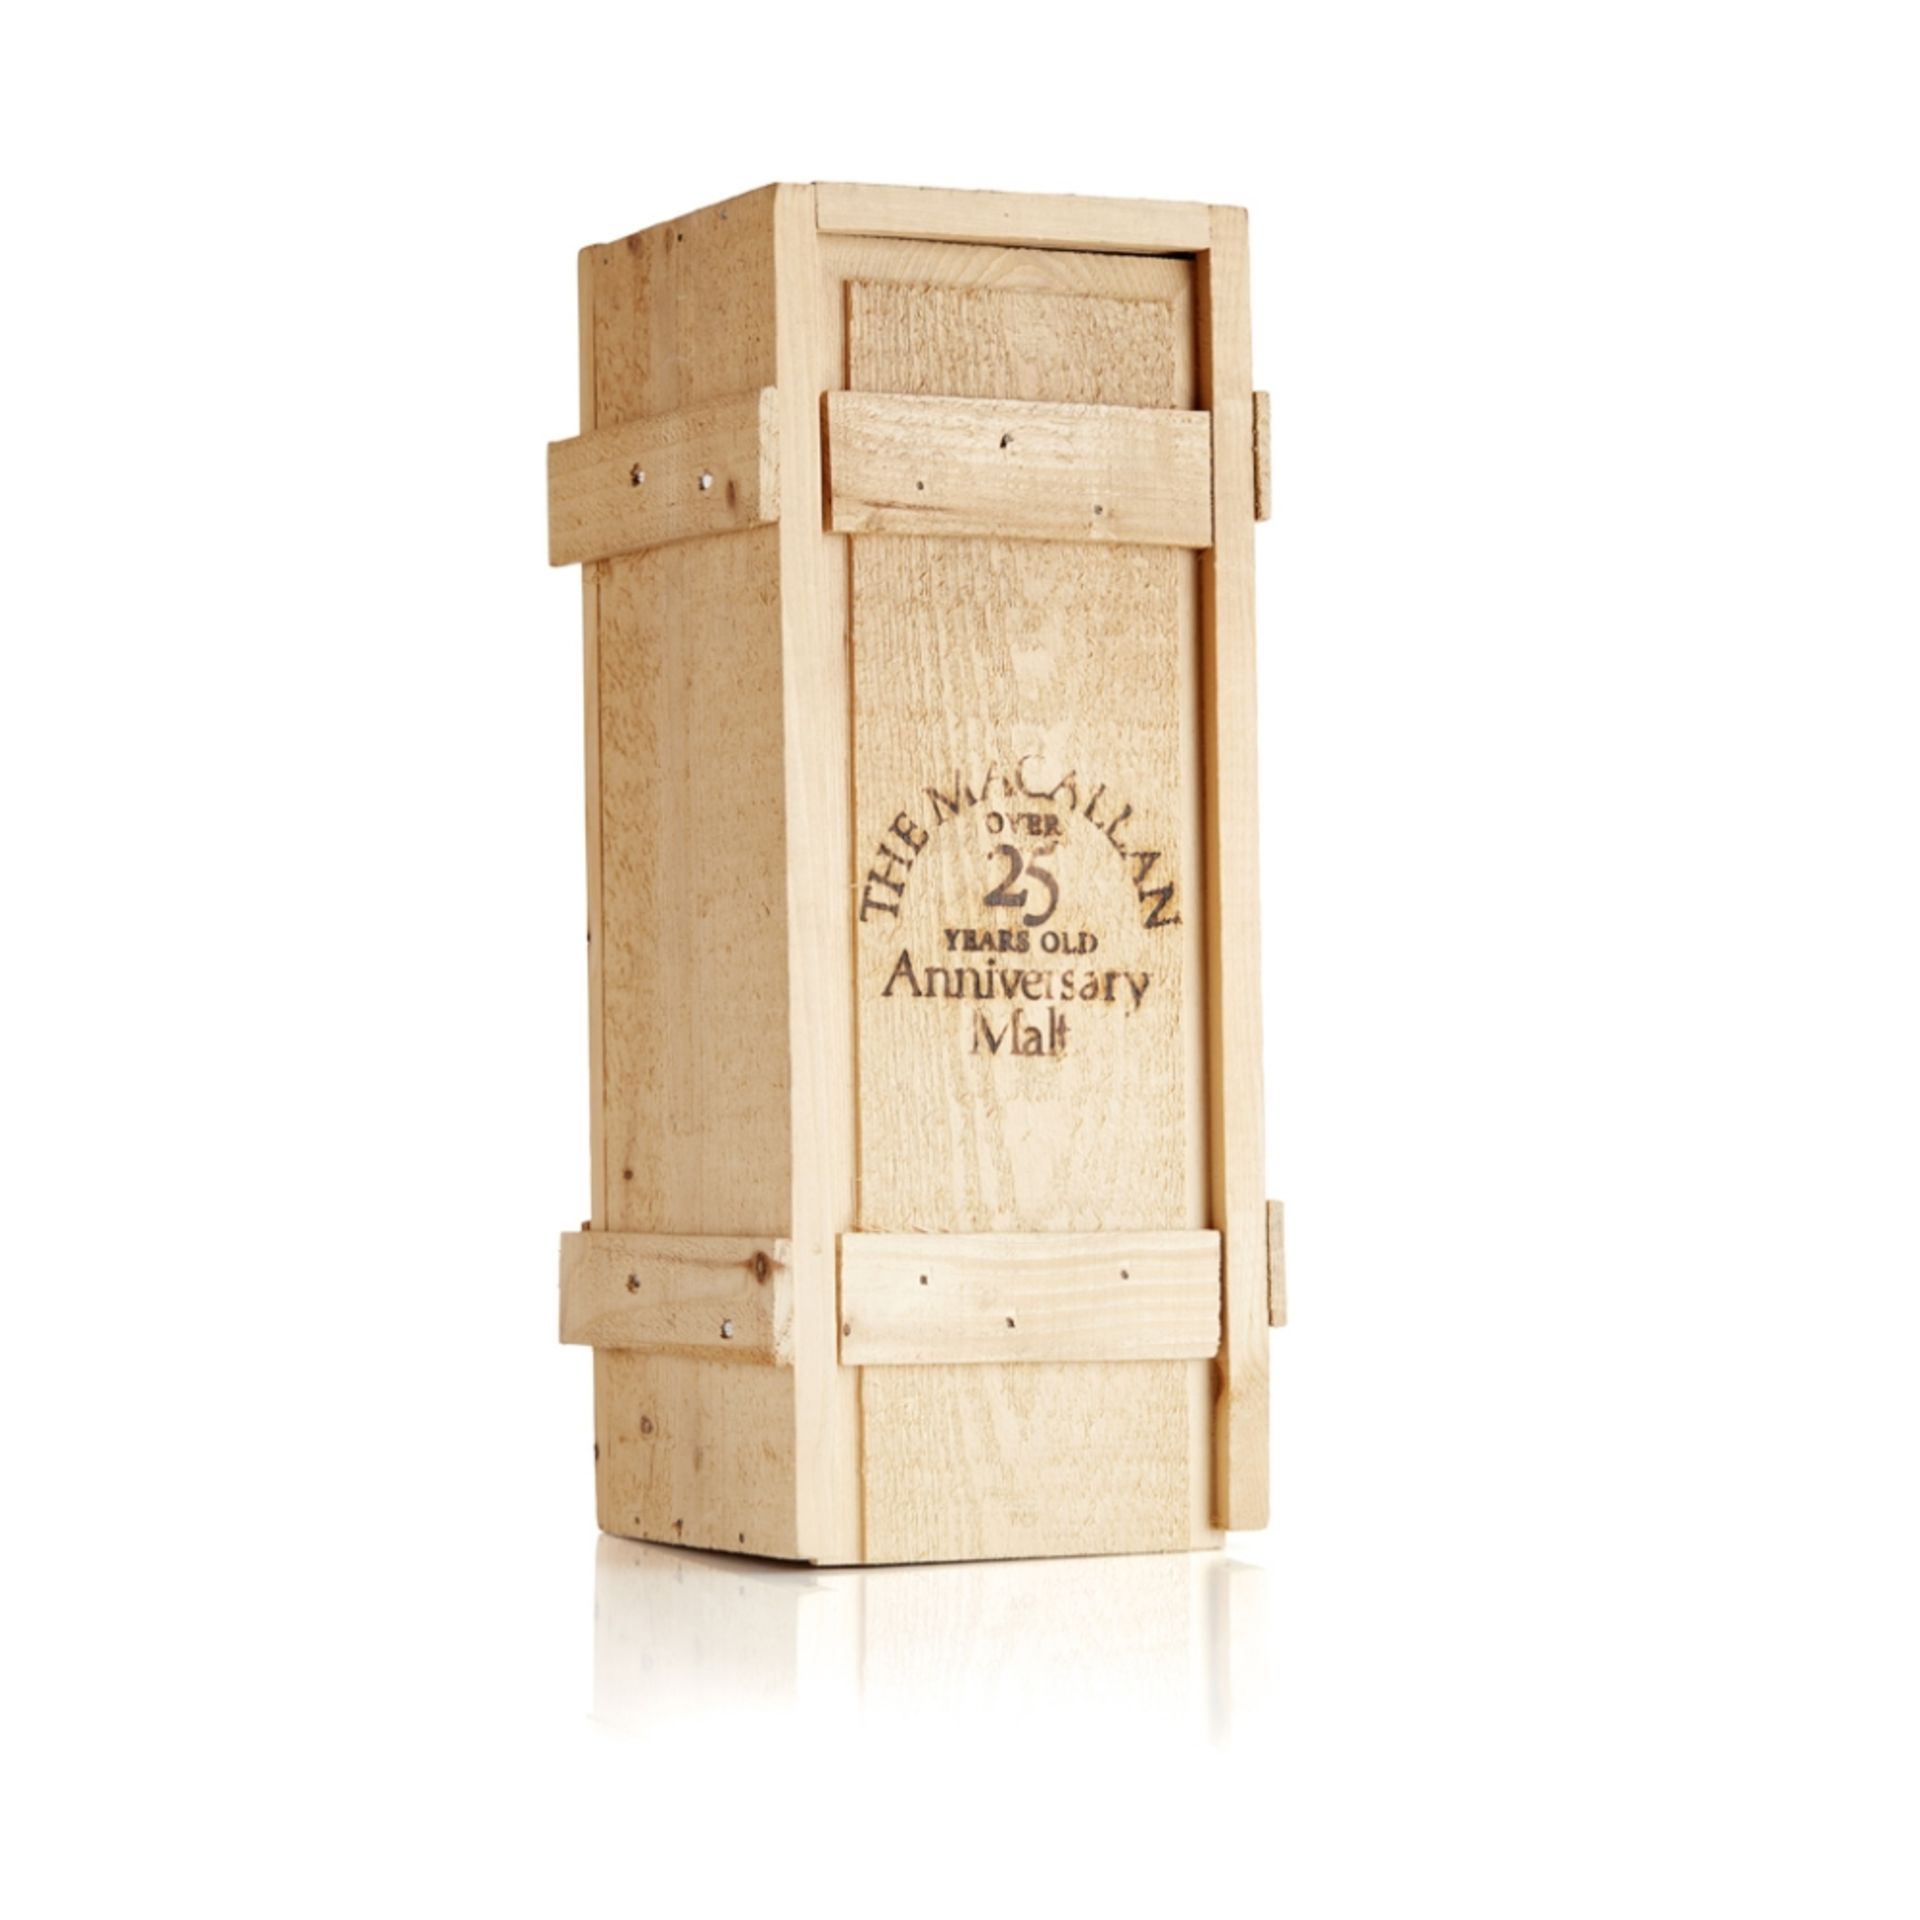 THE MACALLAN 1965 25 YEAR OLD ANNIVERSARY MALT with wooden presentation case 75cl/ 43% Note: The - Image 4 of 4